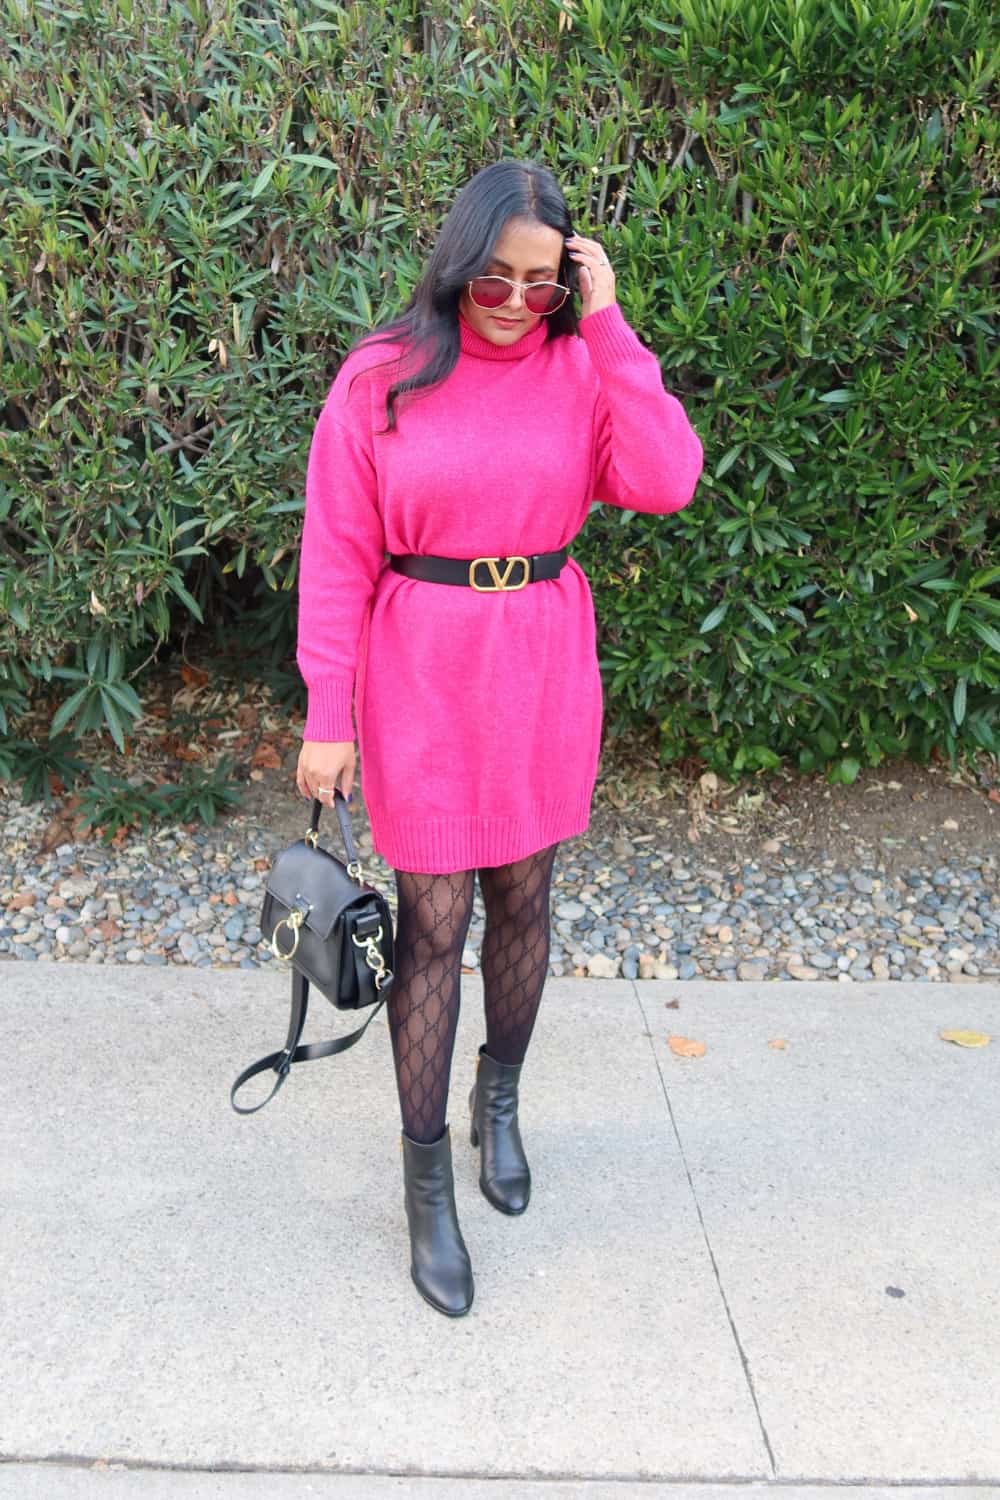 Patterned tights with sweater dresses